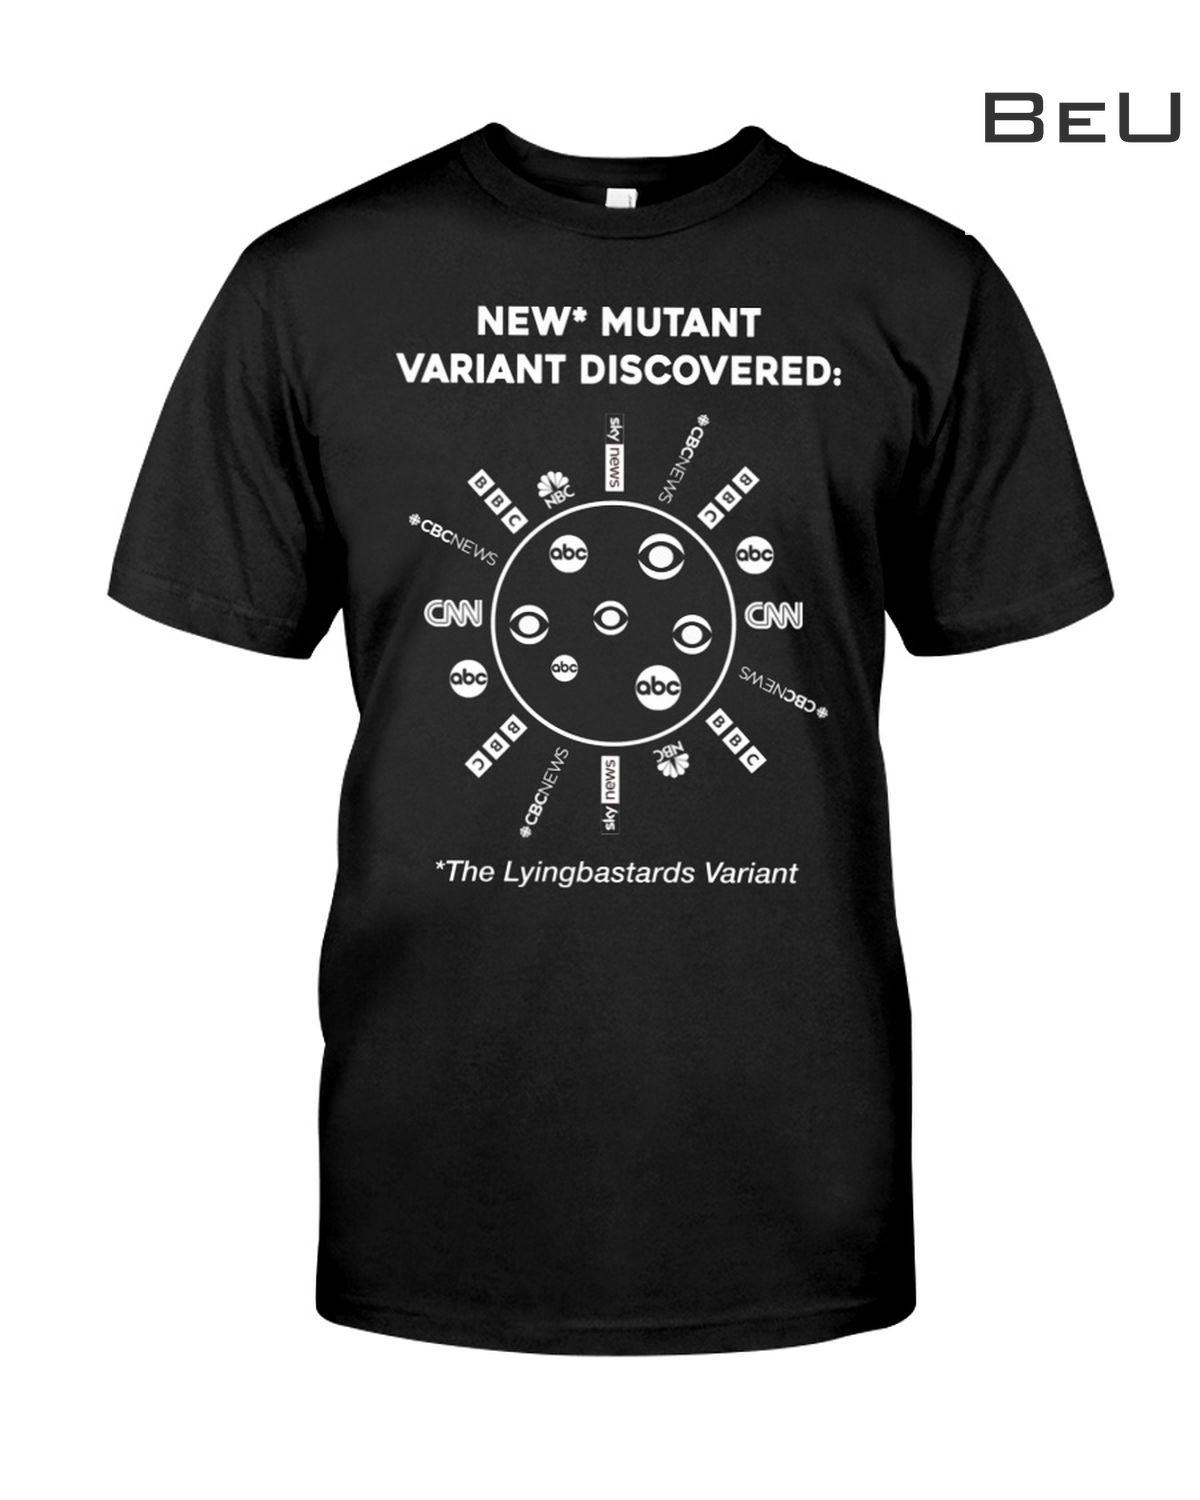 New Mutant Variant Discovered Shirt